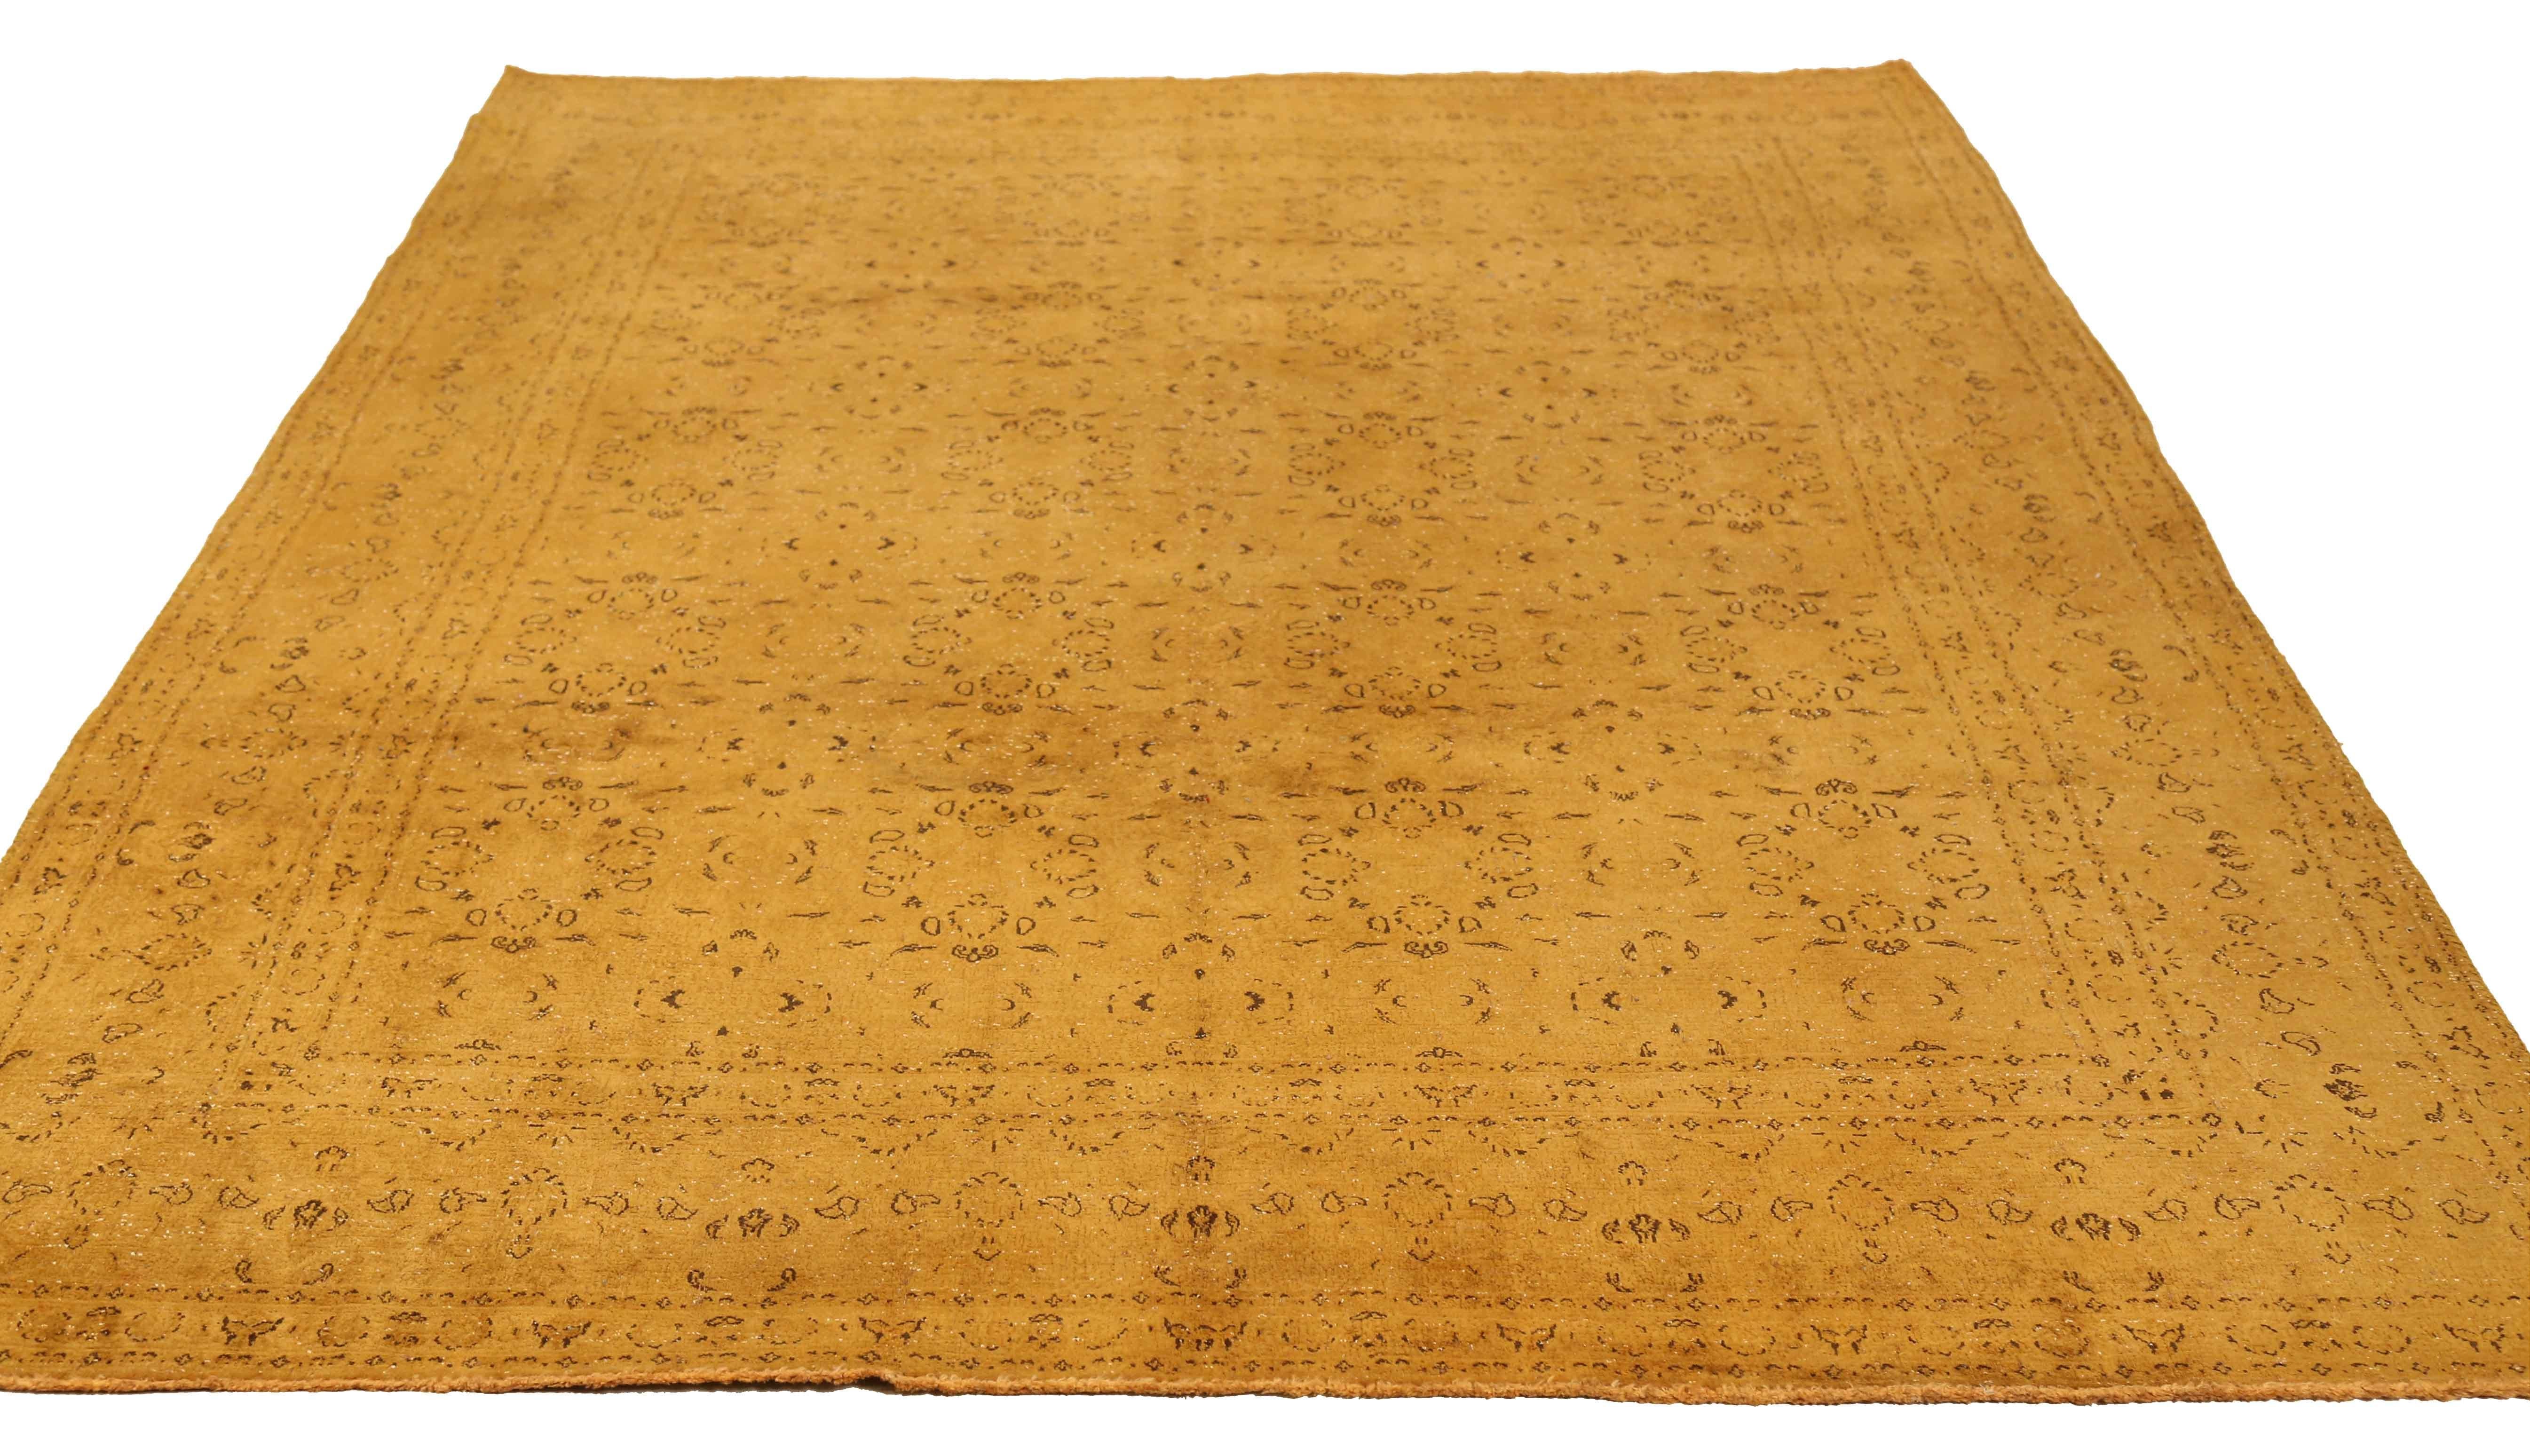 Antique handmade Persian area rug from high quality sheep’s wool and colored with eco-friendly vegetable dyes that are proven safe for humans and pets alike. It’s an antique rug overdyed with a bold color to make it appear distressed and washed out